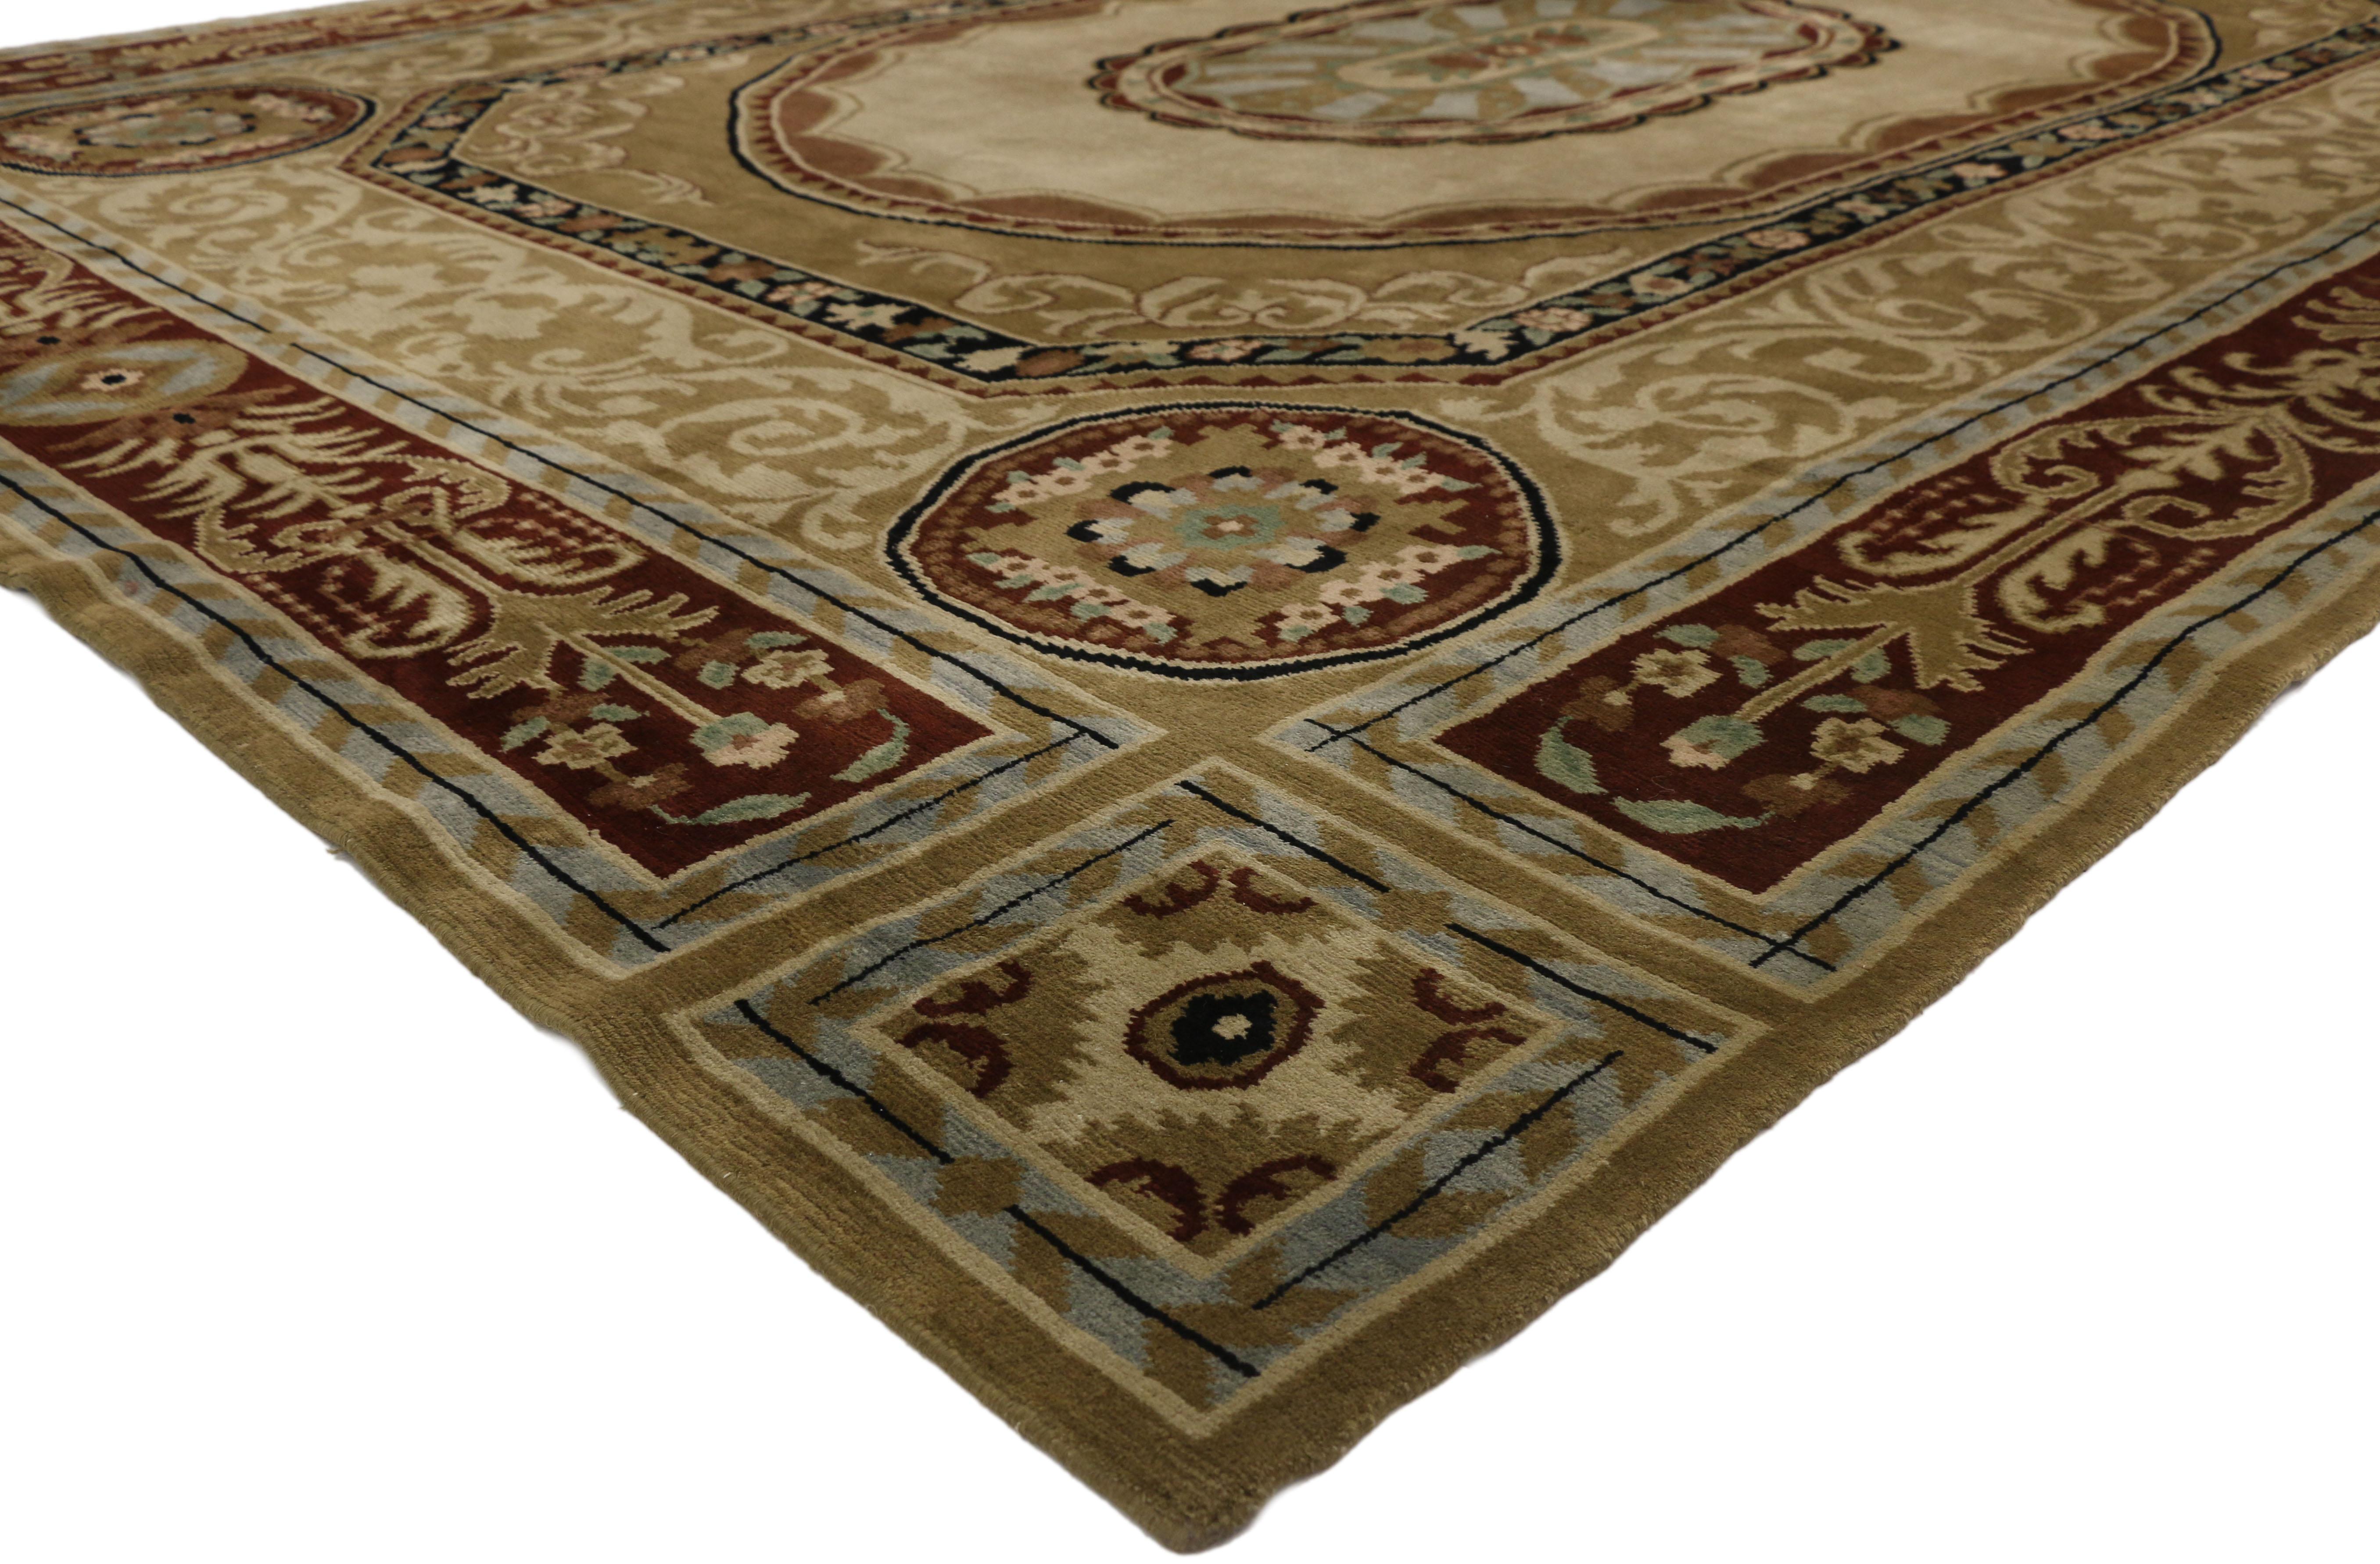 77314 Vintage French Aubusson Savonnerie Design Area Rug with Regal Louis XV Style 10'00 x 14'00. Reminisce of the ceiling in the dining room of Hotel de Trevise, this vintage French Aubusson Savonnerie style rug beautifully highlights a regal Louis